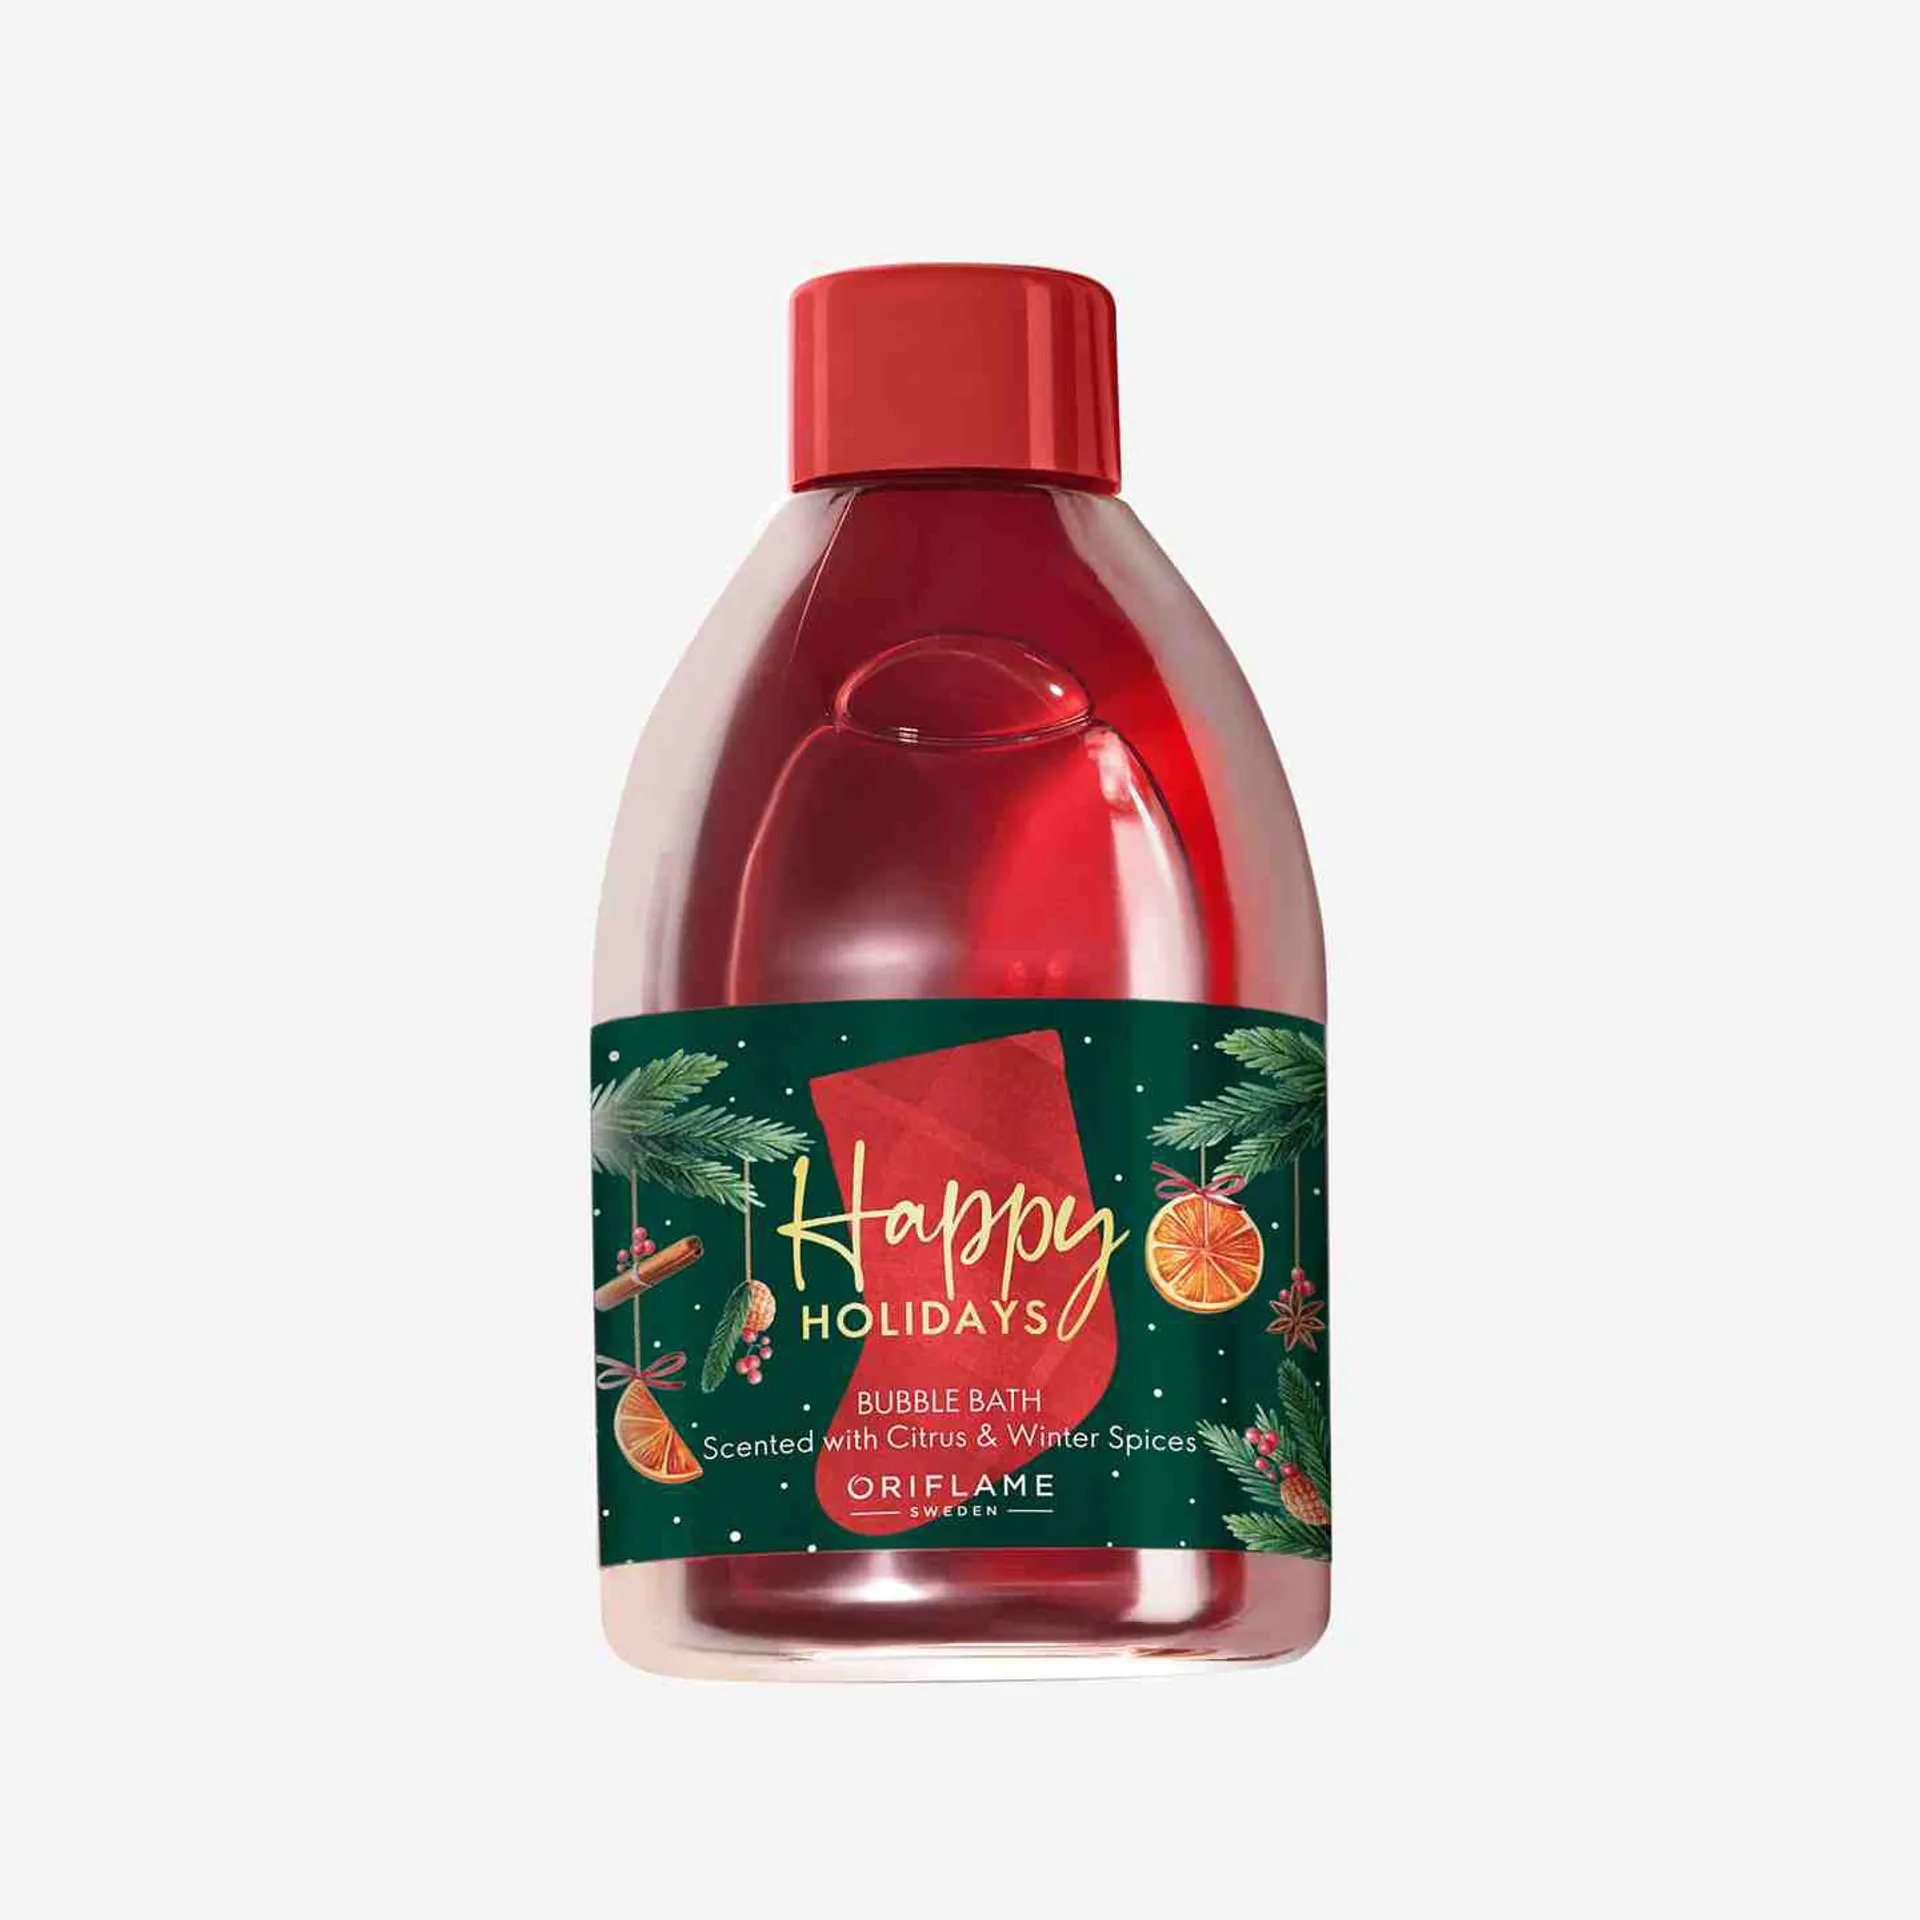 Happy Holidays Bubble Bath Scented with Citrus & Winter Spices